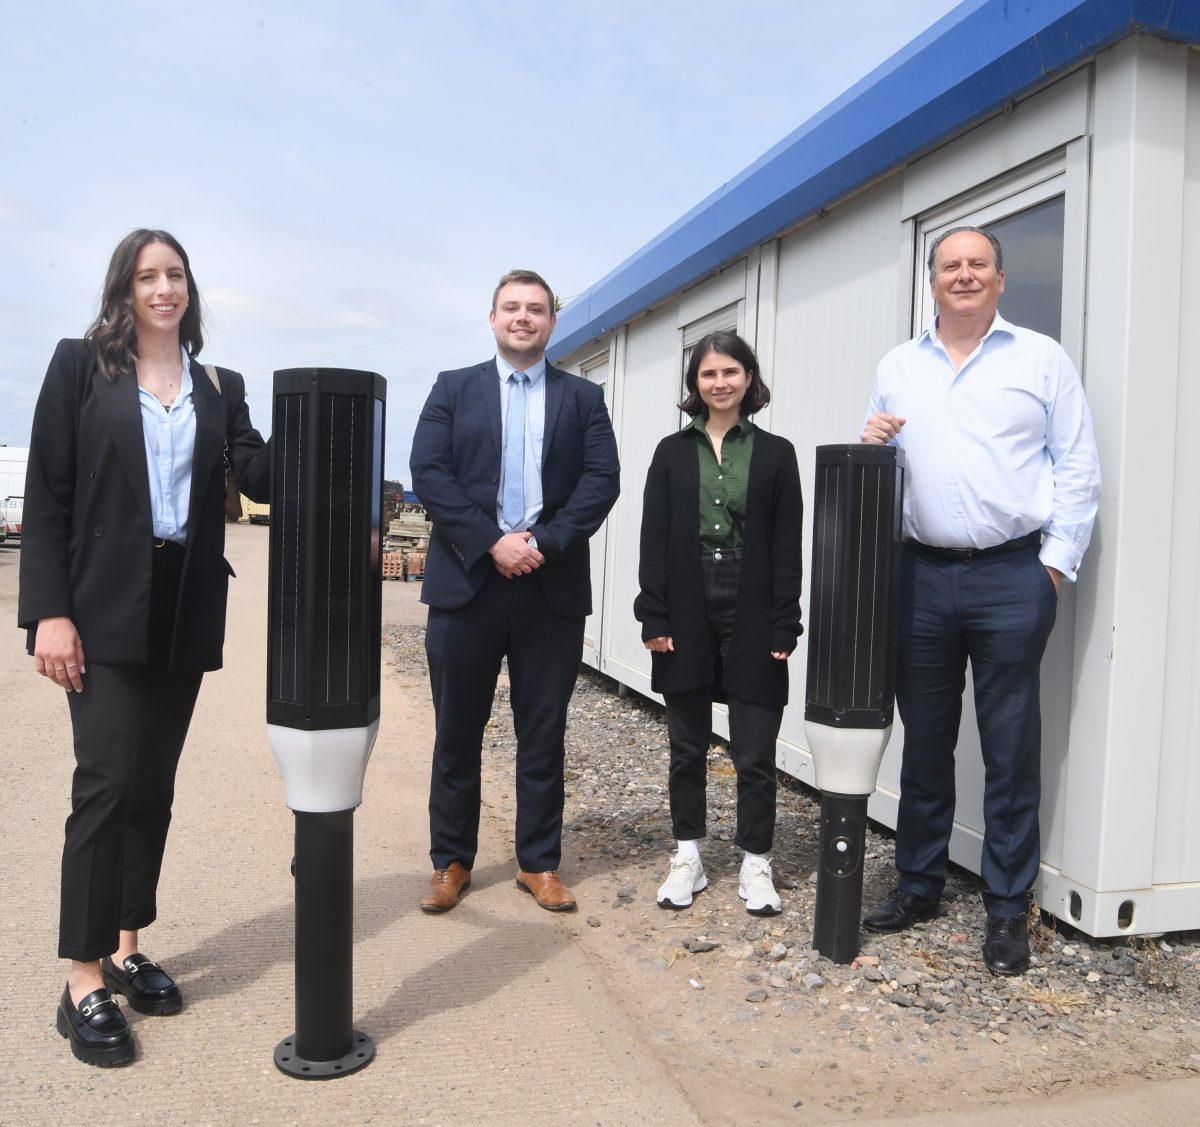 Pioneering solar panel project powering ahead at Ryton business